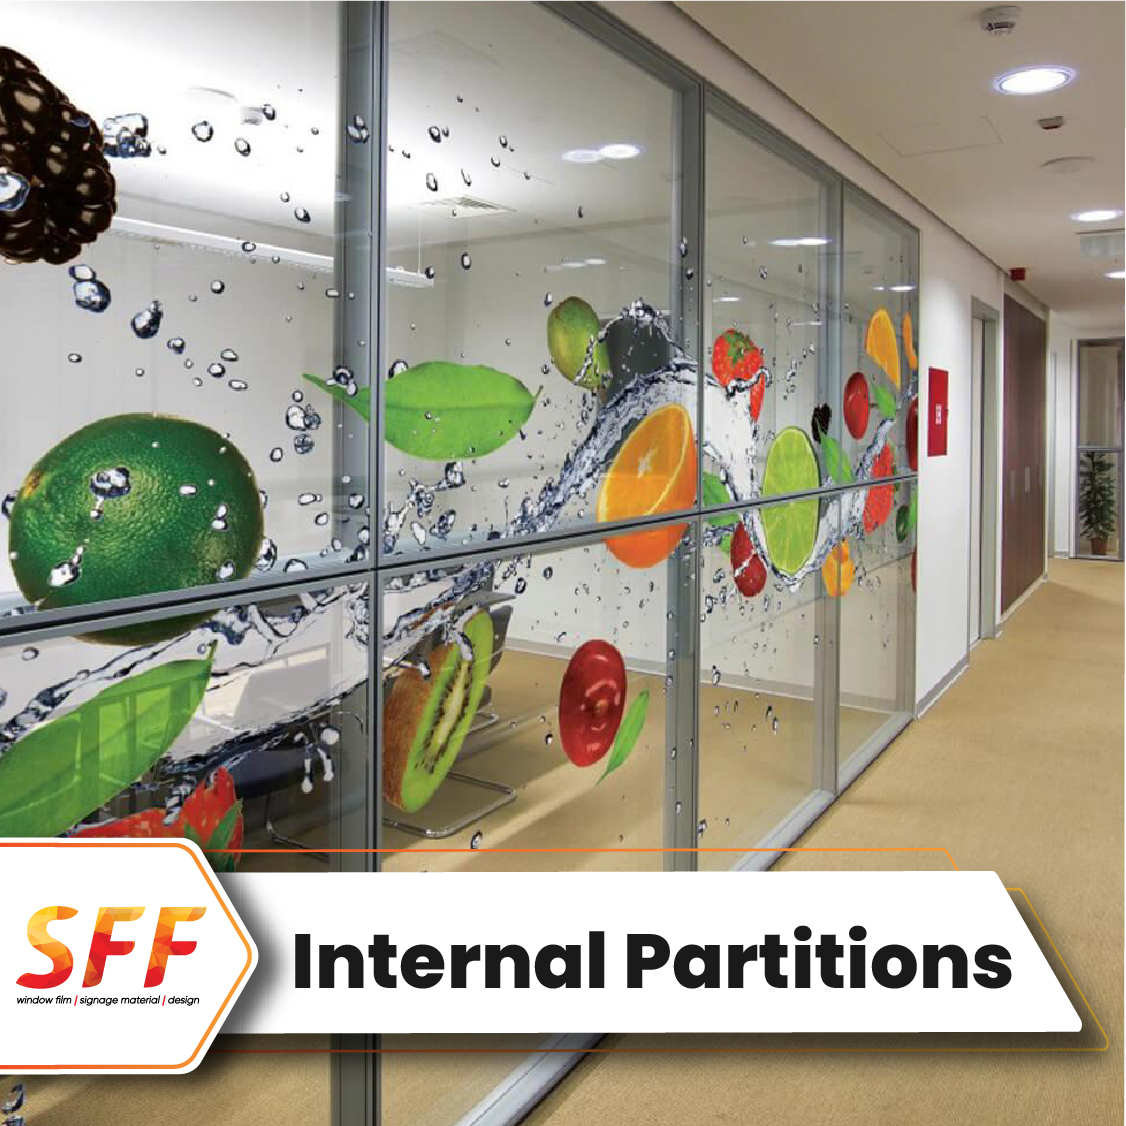 Internal Partitions